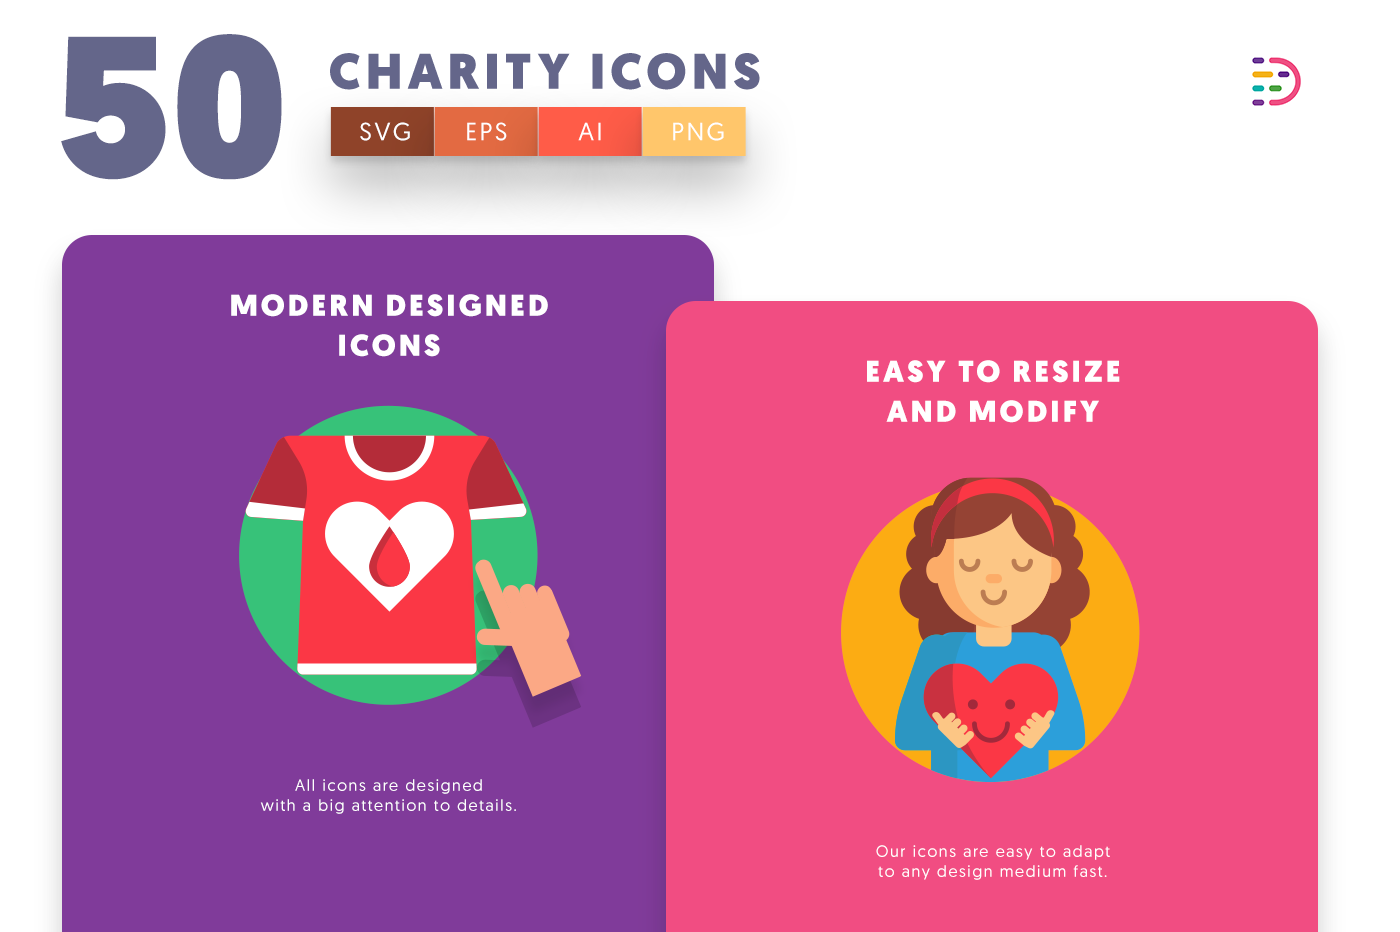 Charity icons